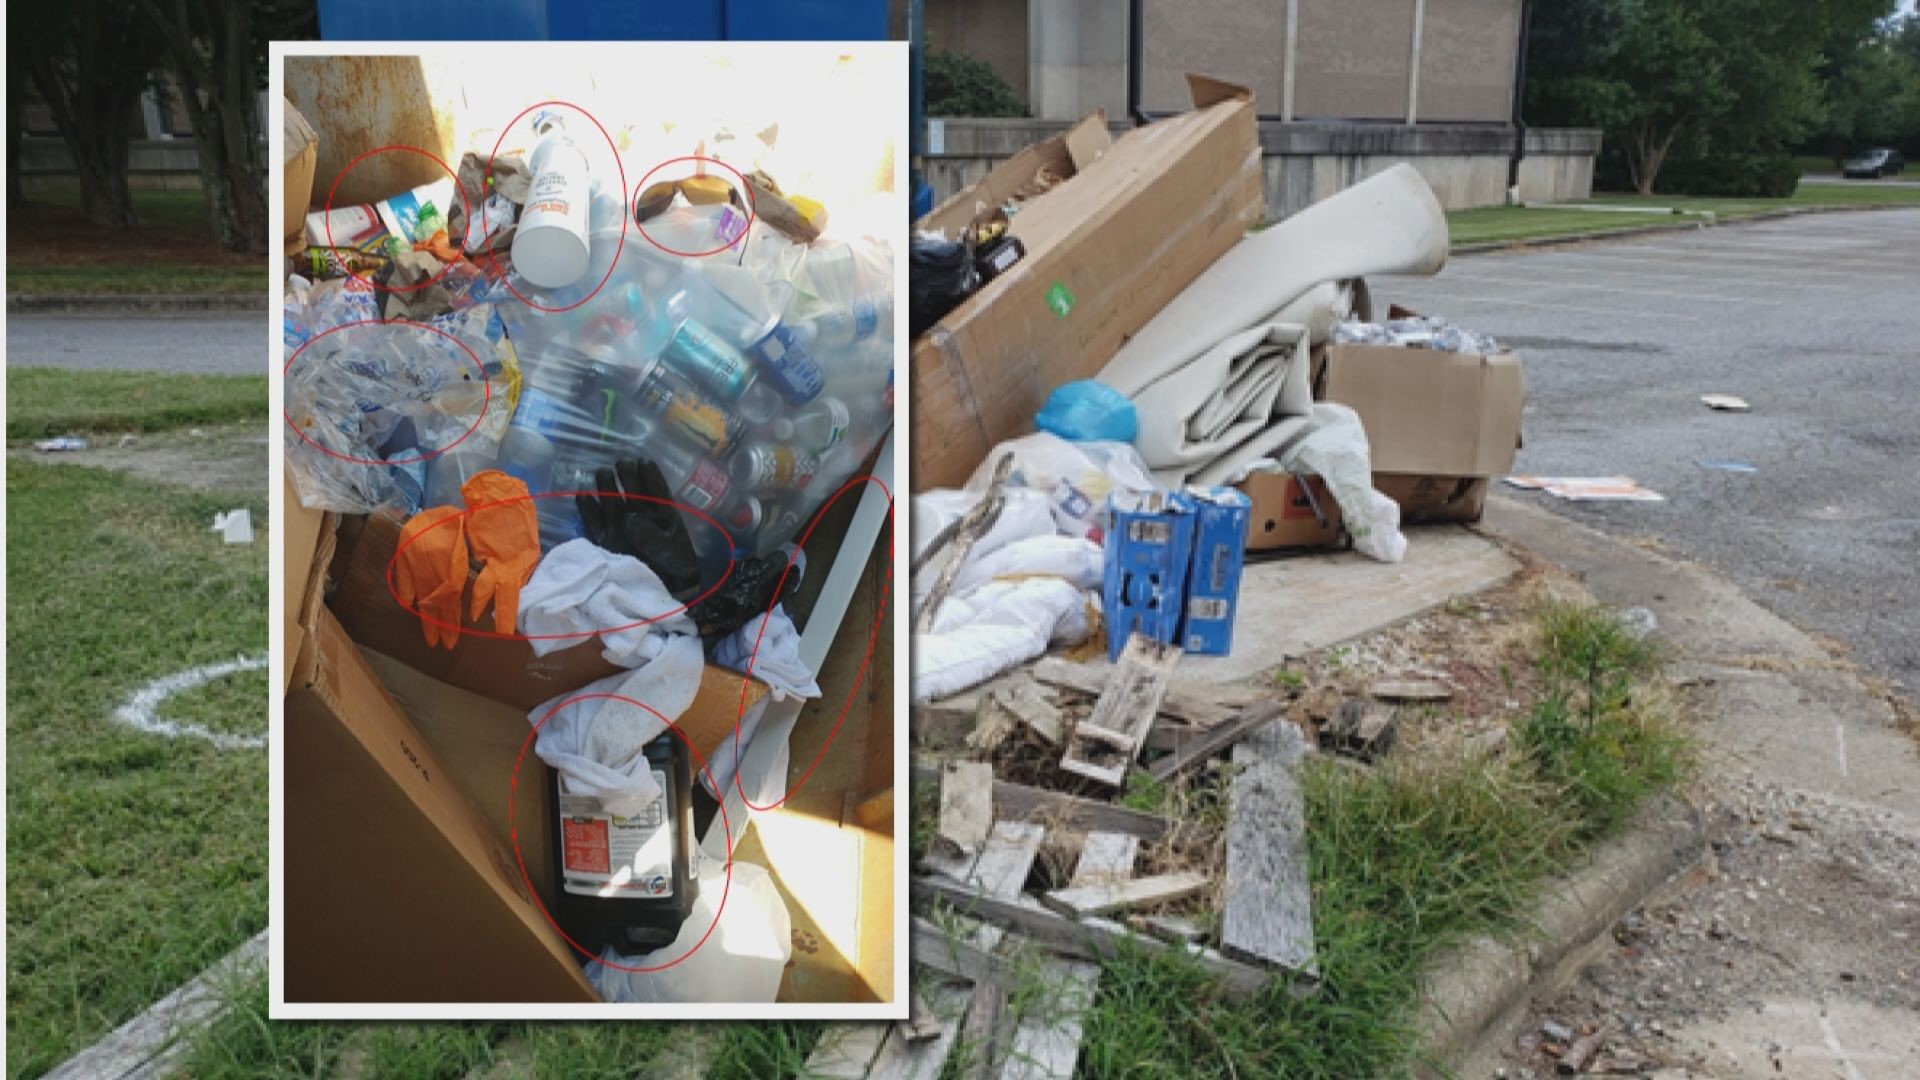 The City of Greensboro says illegal dumping is to blame.